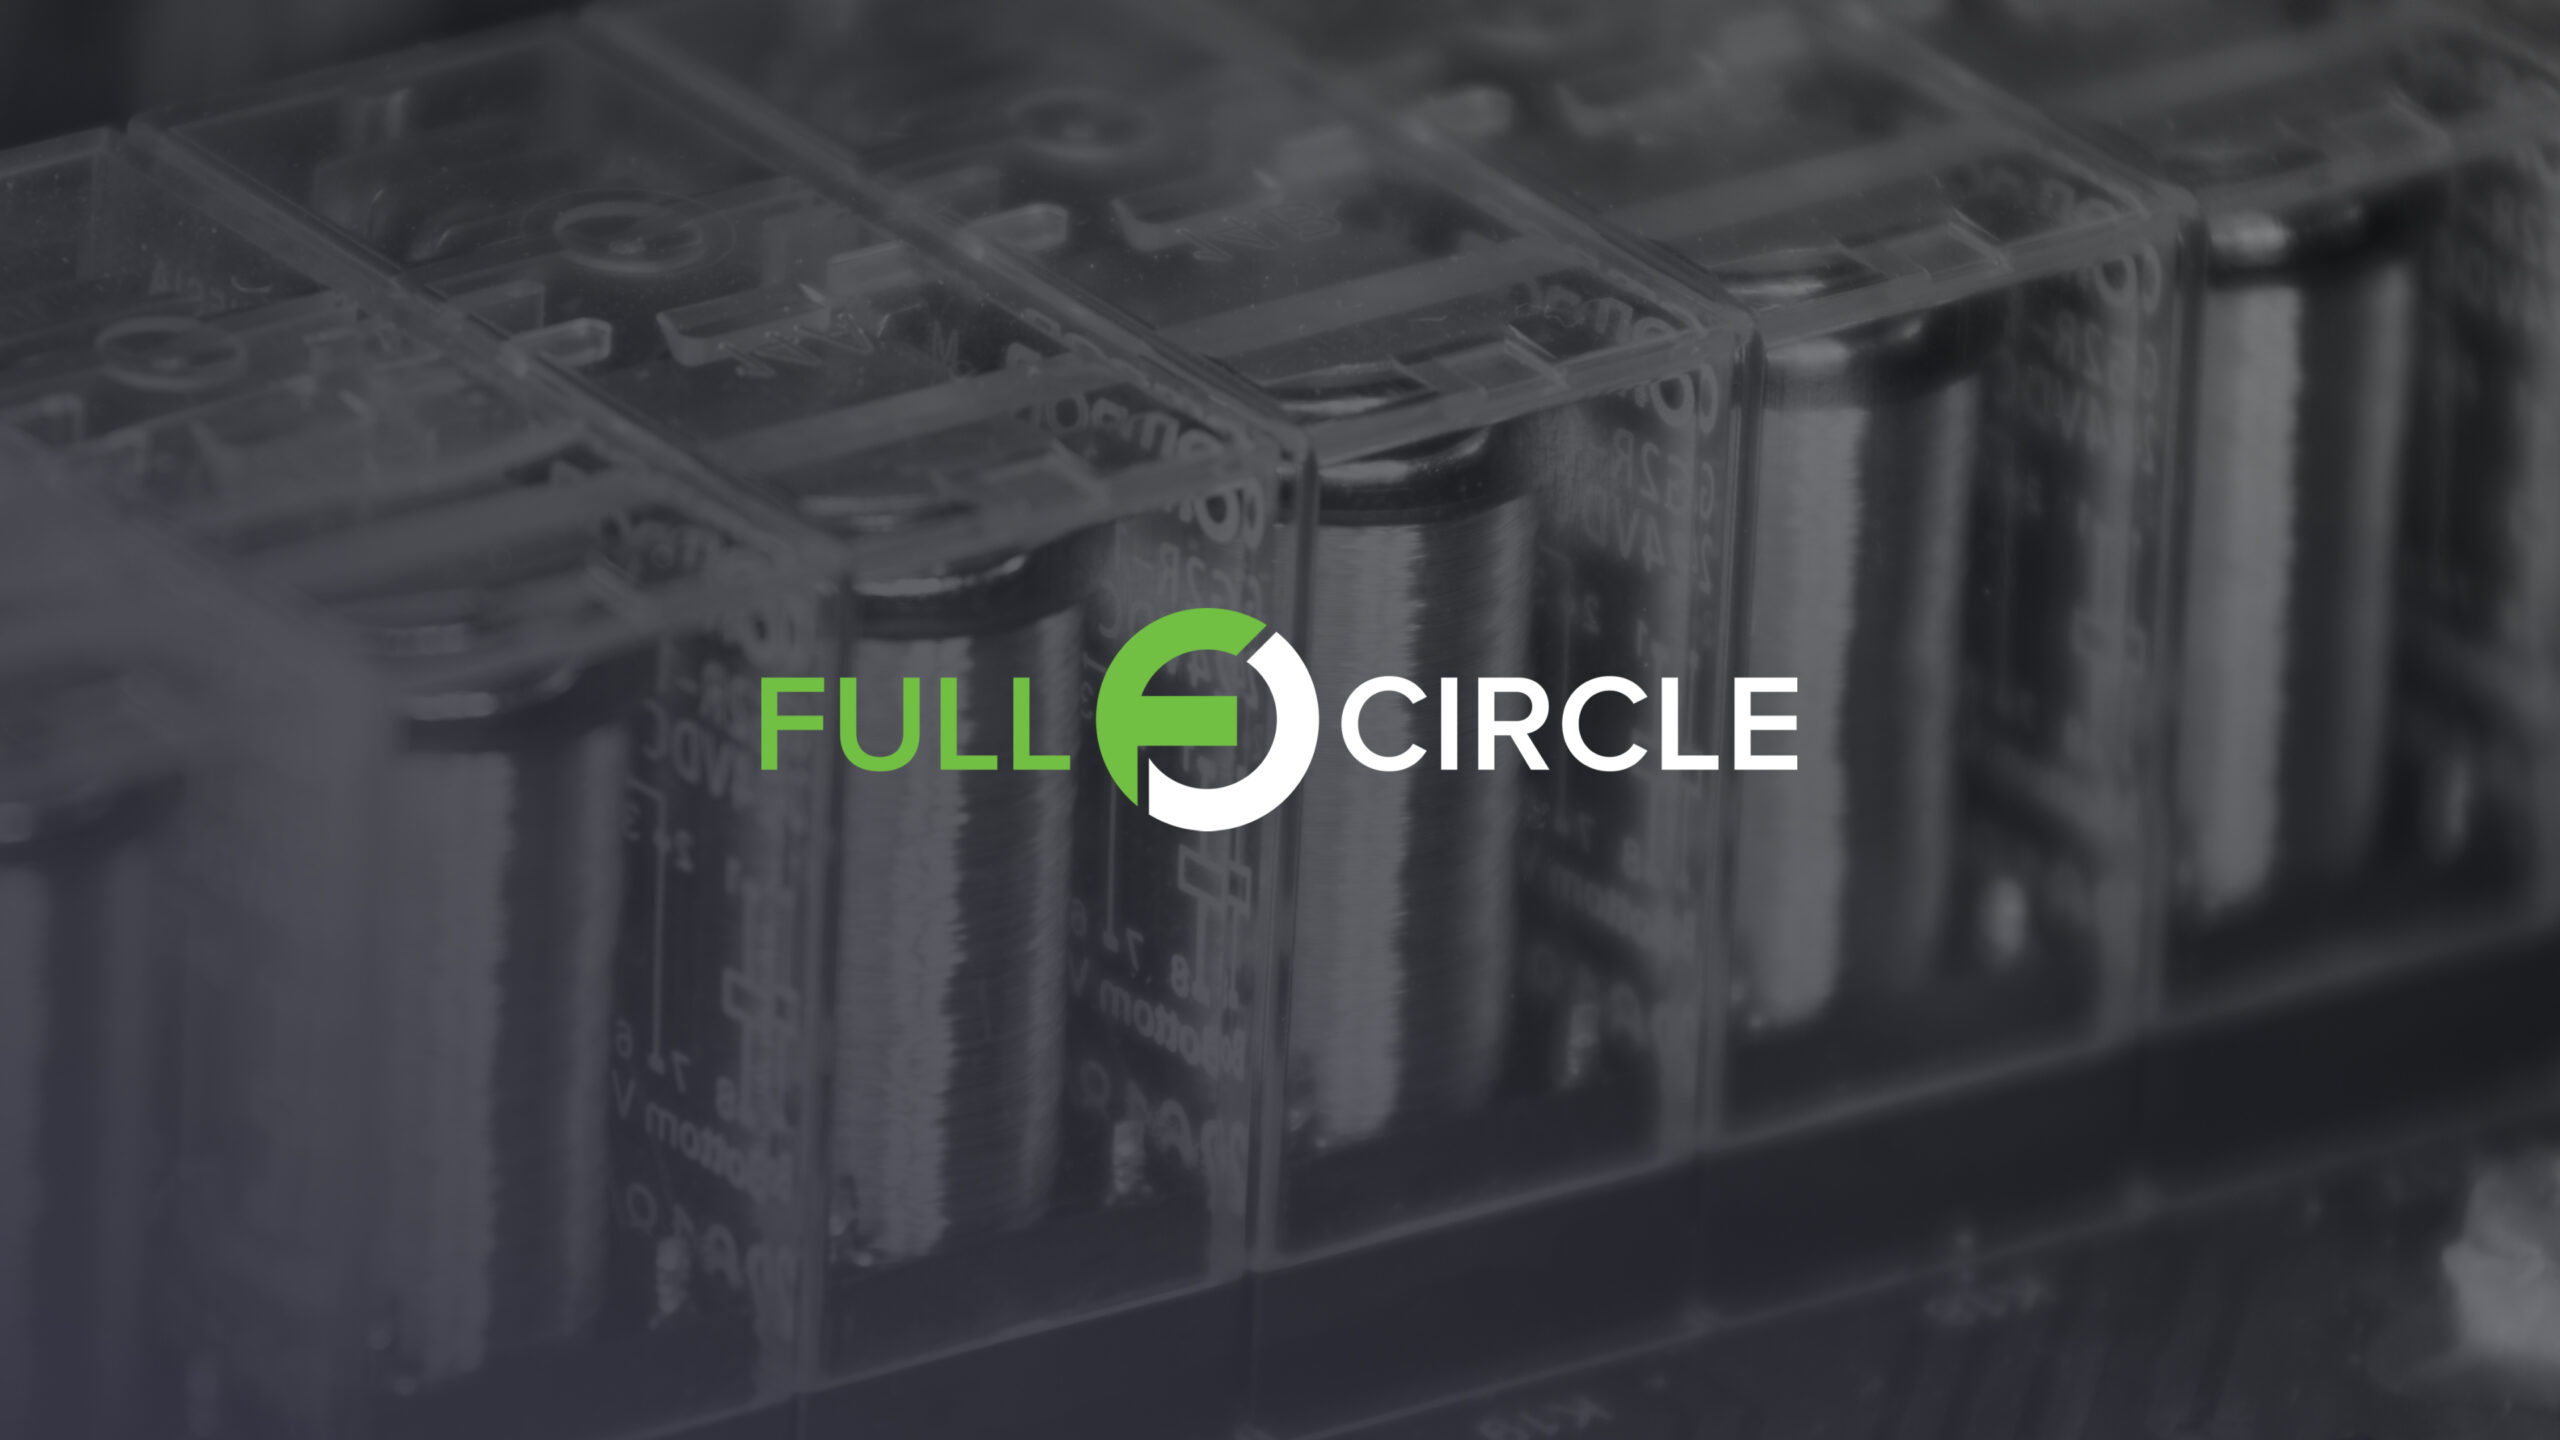 Full Circle Lithium Secures Second Client for Future Production of Lithium Using its Leading Lithium Extraction and Processing Technology